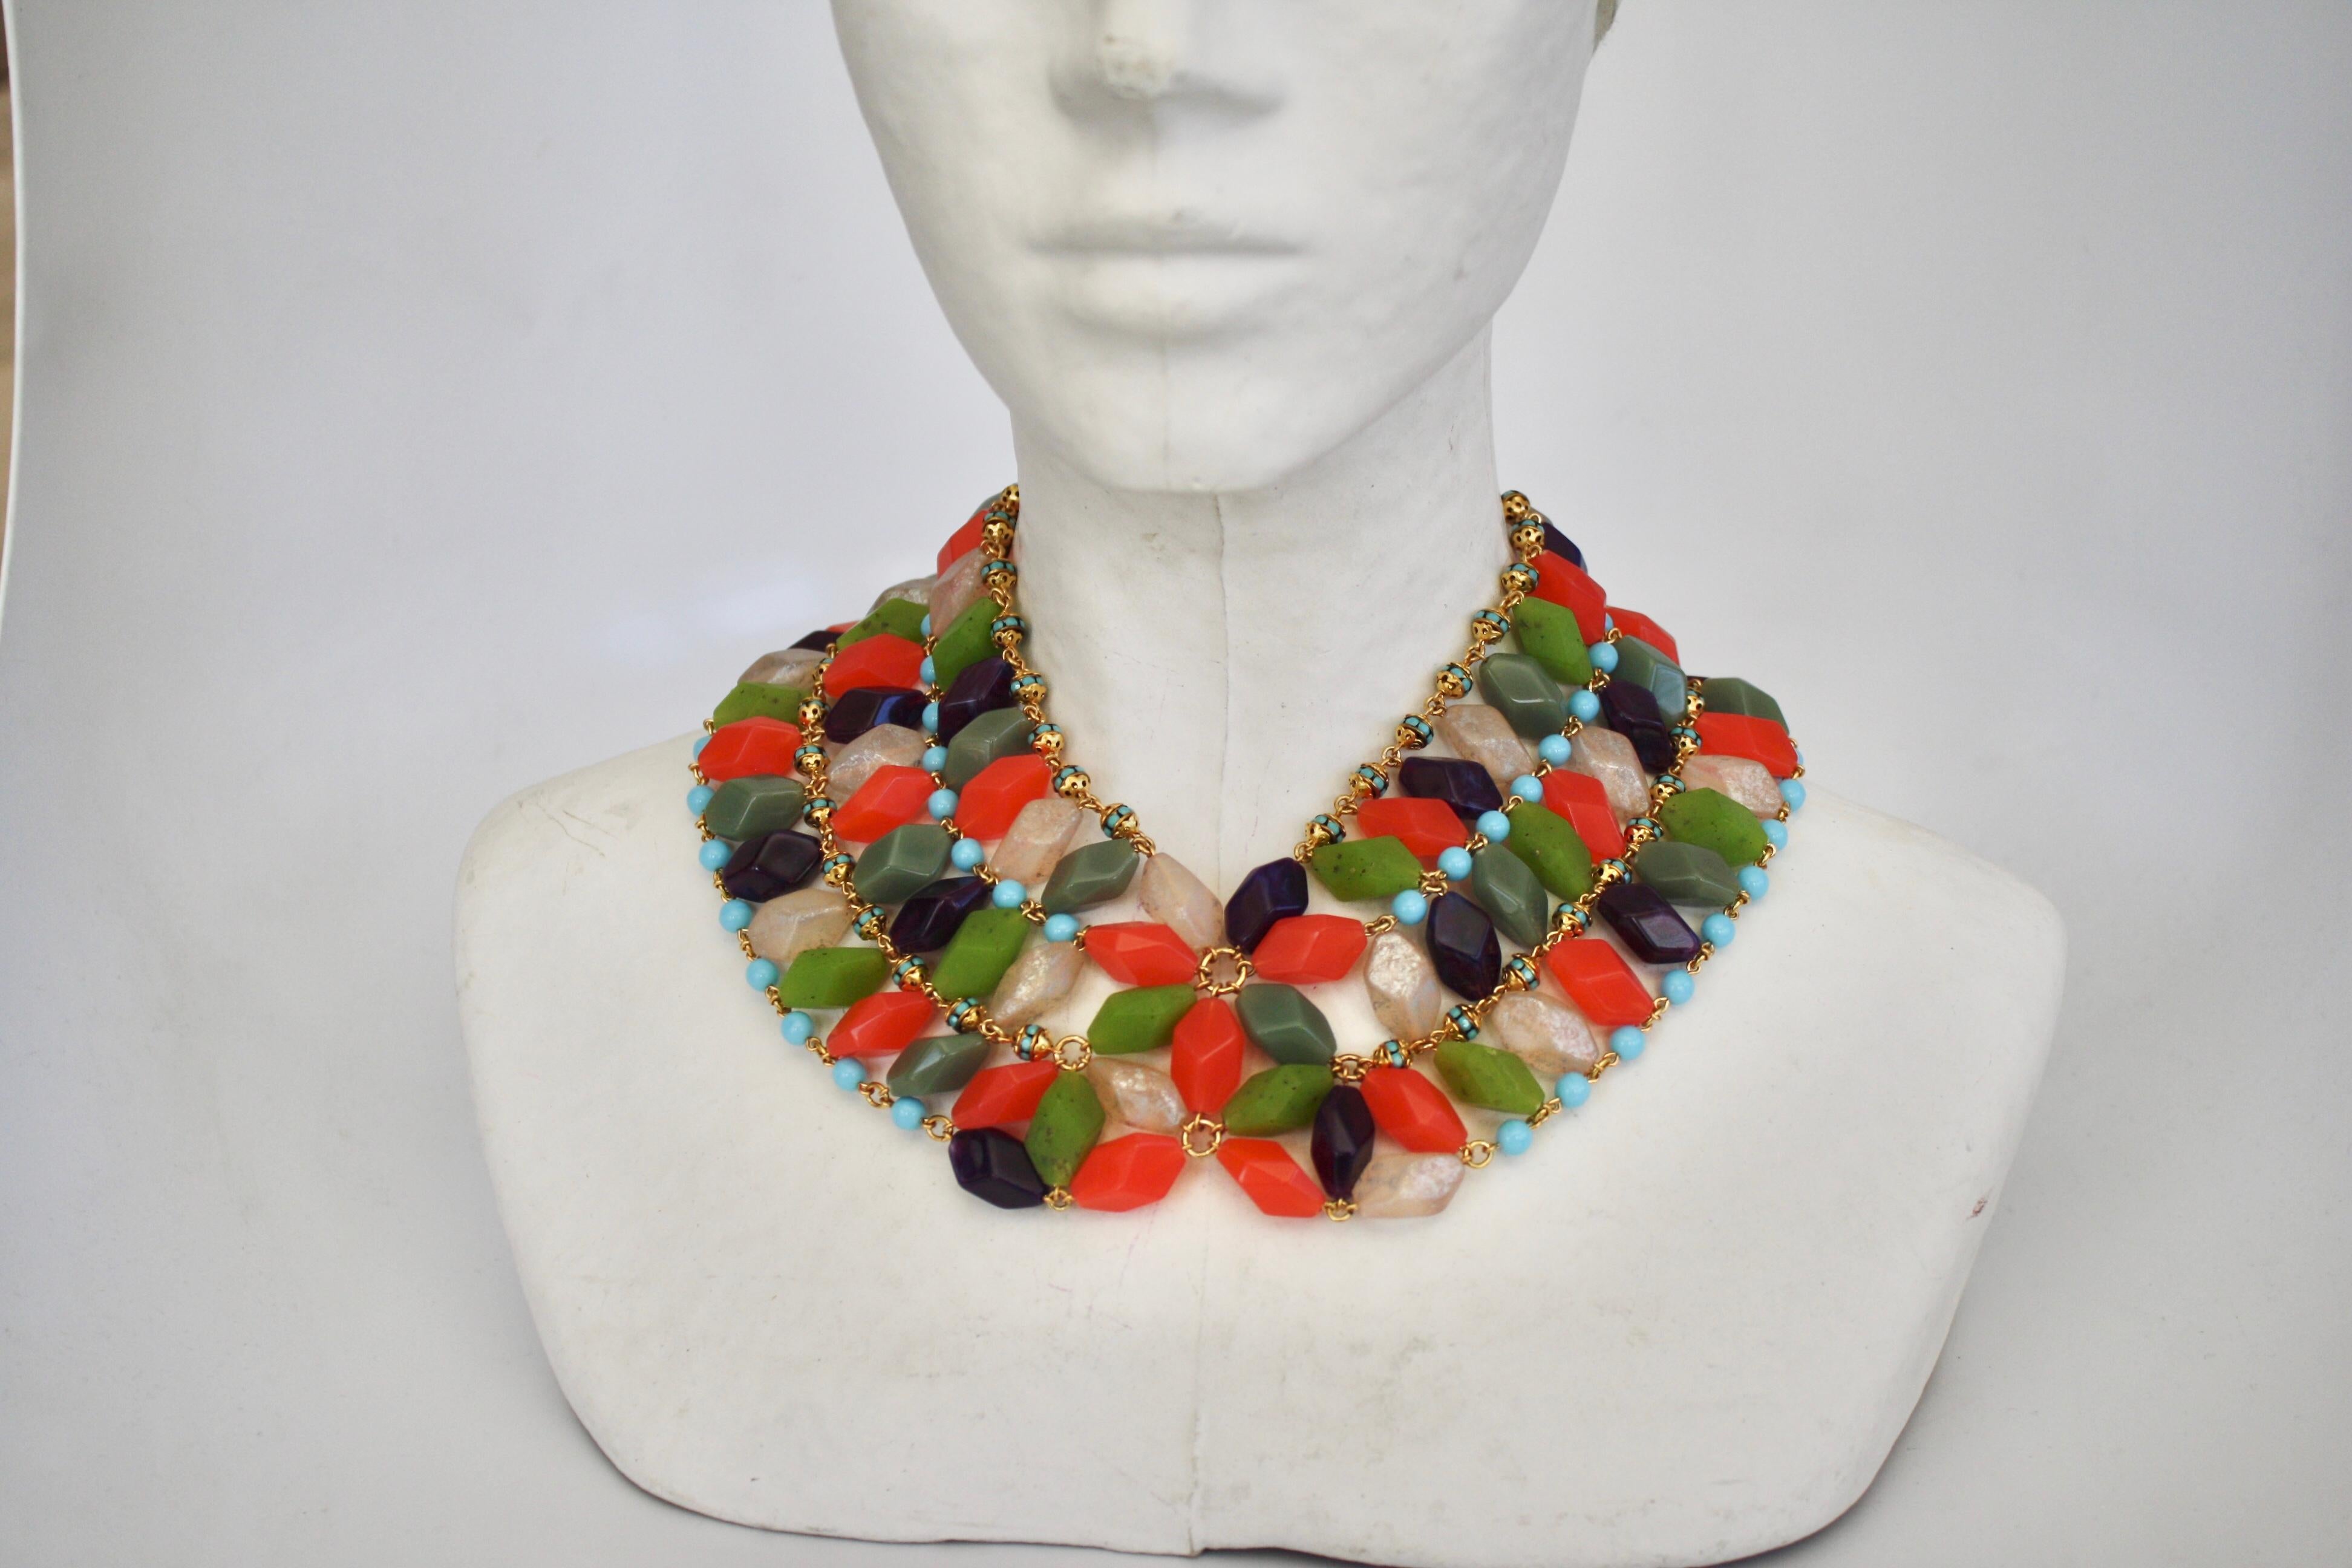 Multi color glass bead necklace strung with Swarovski crystal rondelles from Francoise Montague. Handmade in Paris. 